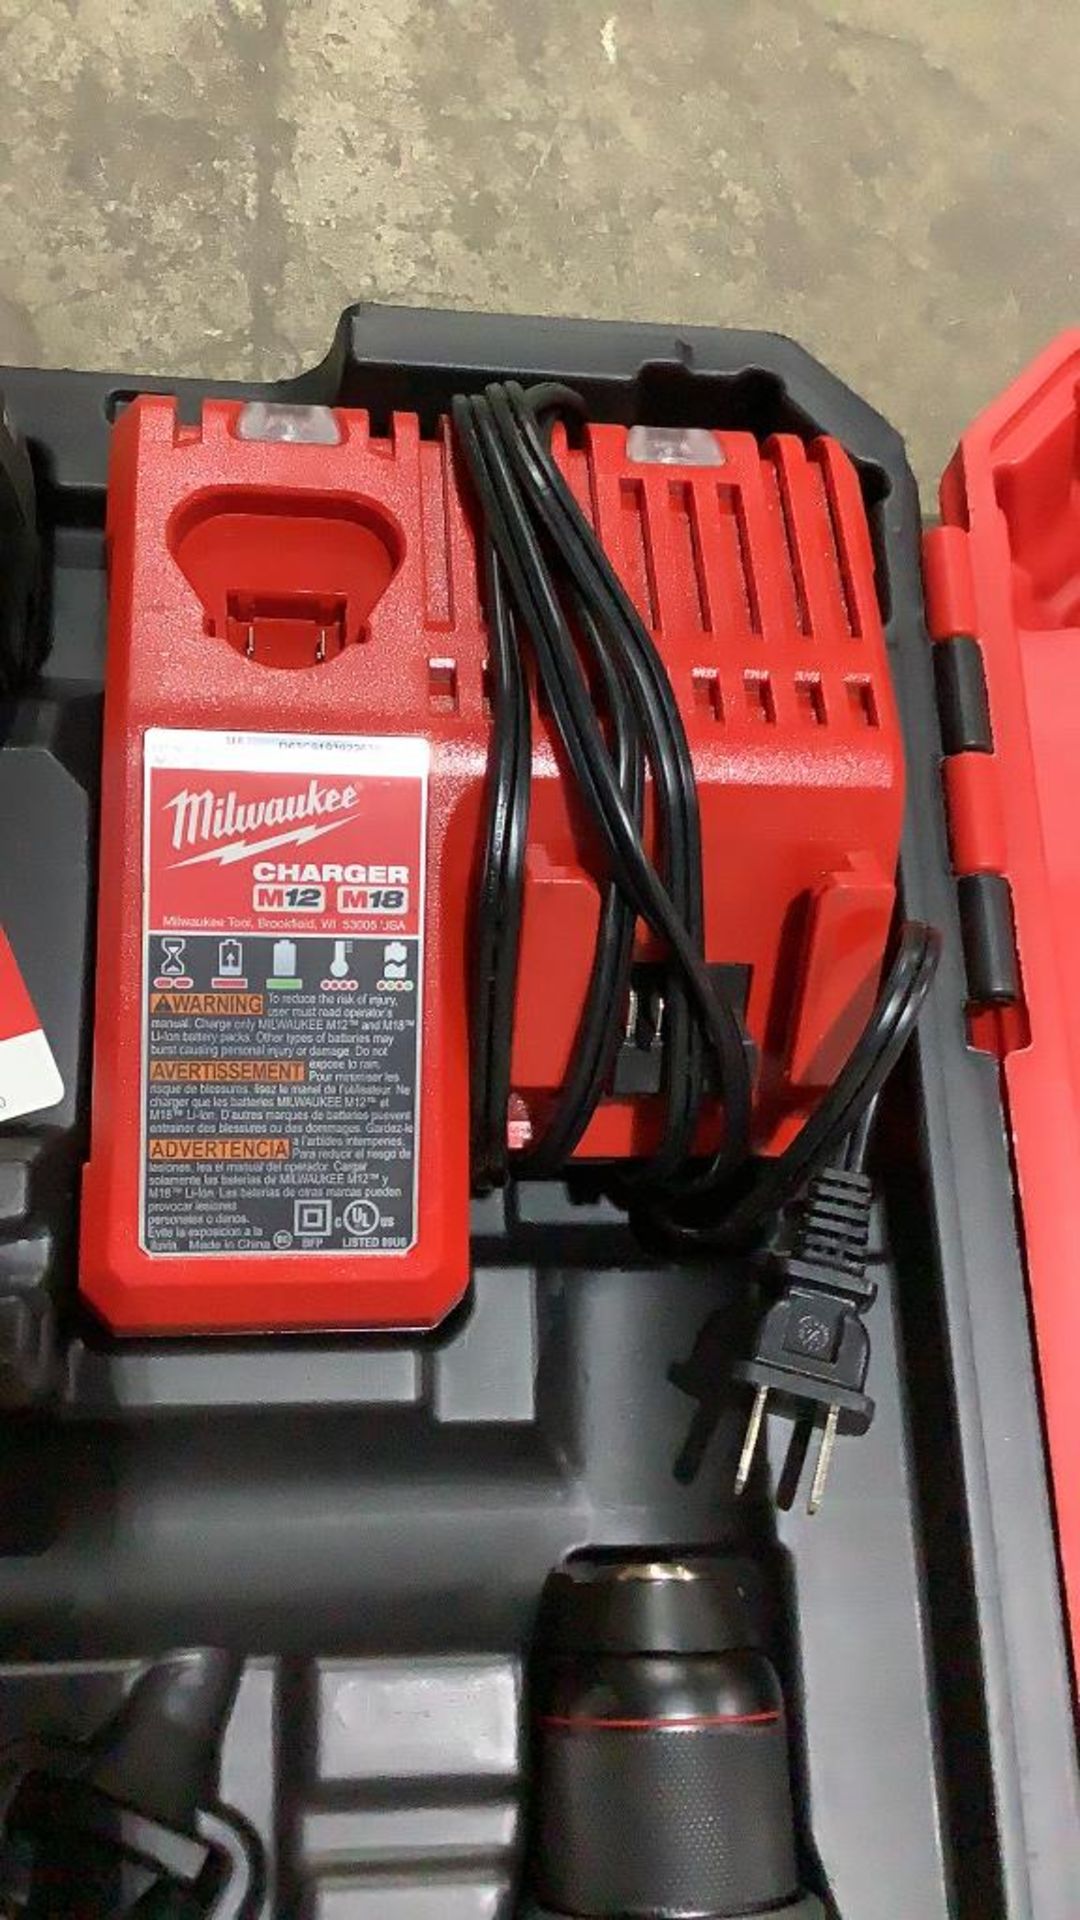 Milwaukee 1/4" Impact Driver and 1/2" Drill/Driver - Image 12 of 14